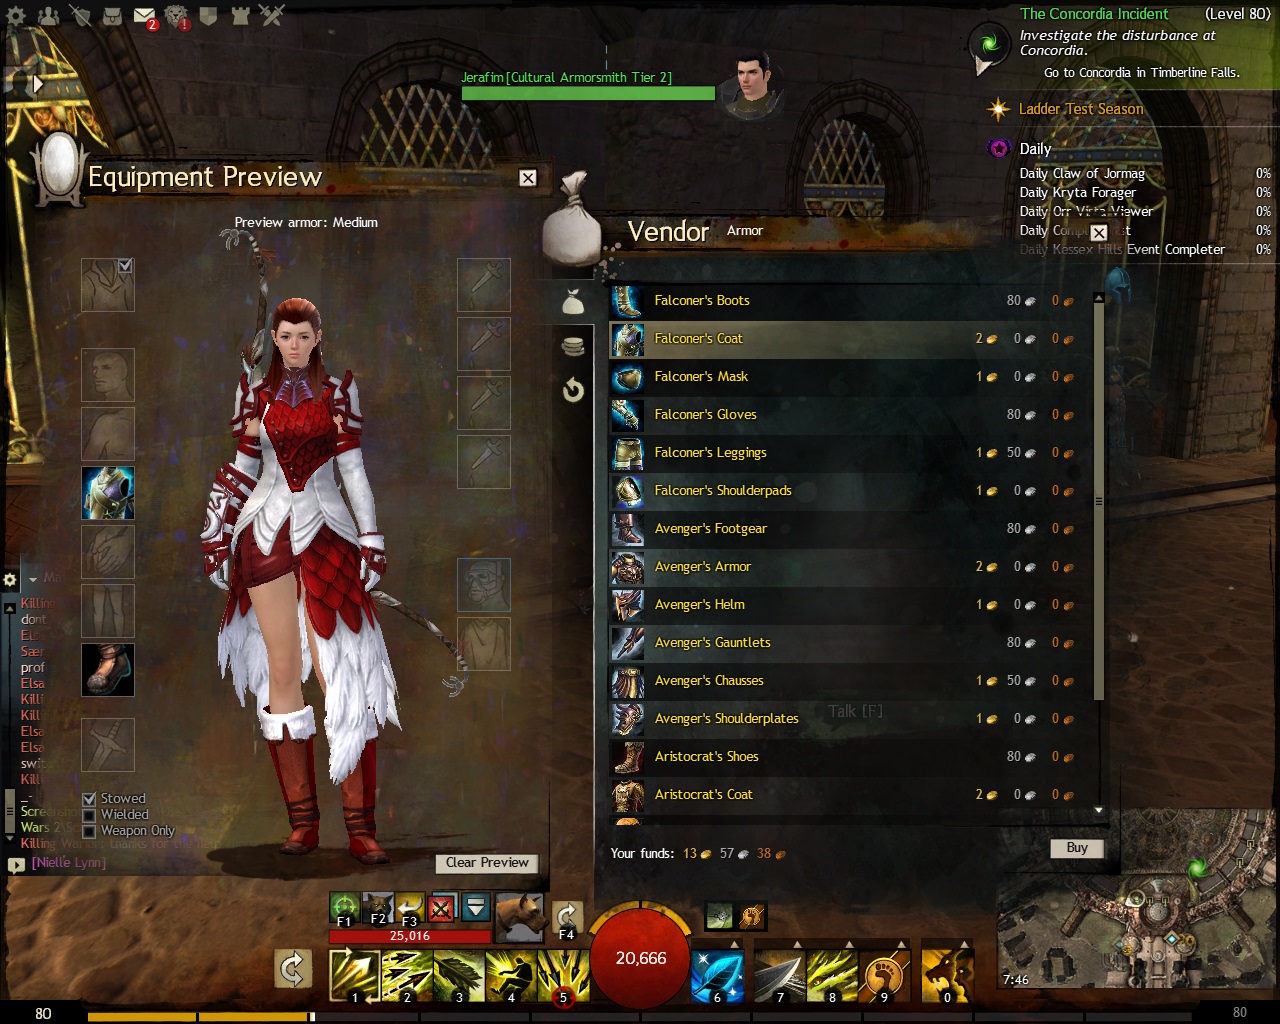 Guild Wars 2 - Falconer's Coat with Skirt and Seeker Boots - 01